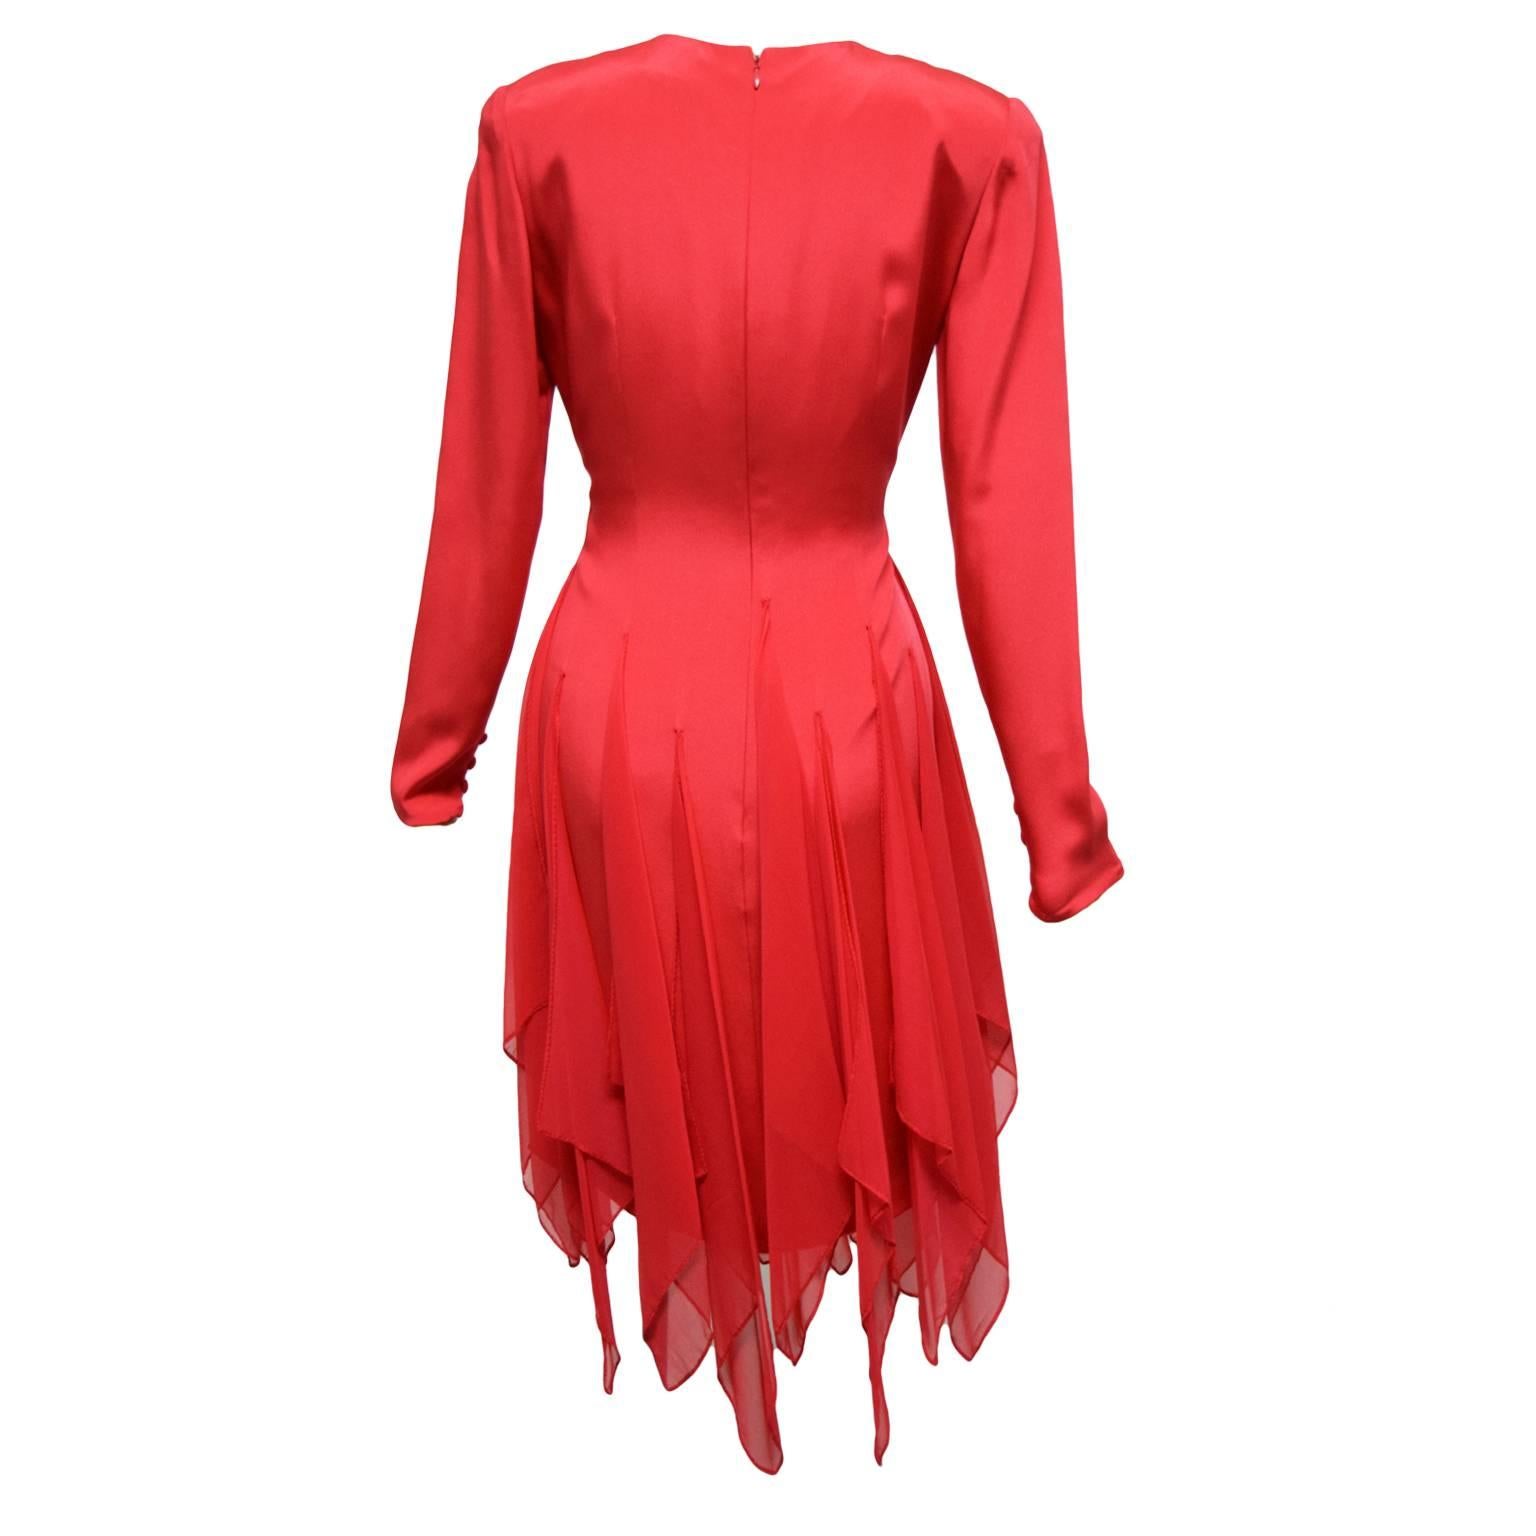 This beautiful one of a kind dress designed by Bill Bass is made of 100% silk and is fully lined. It is long sleeved and has slightly lifted removable shoulder pads for contrast. The skirting part of the dress is a type of handkerchief design and